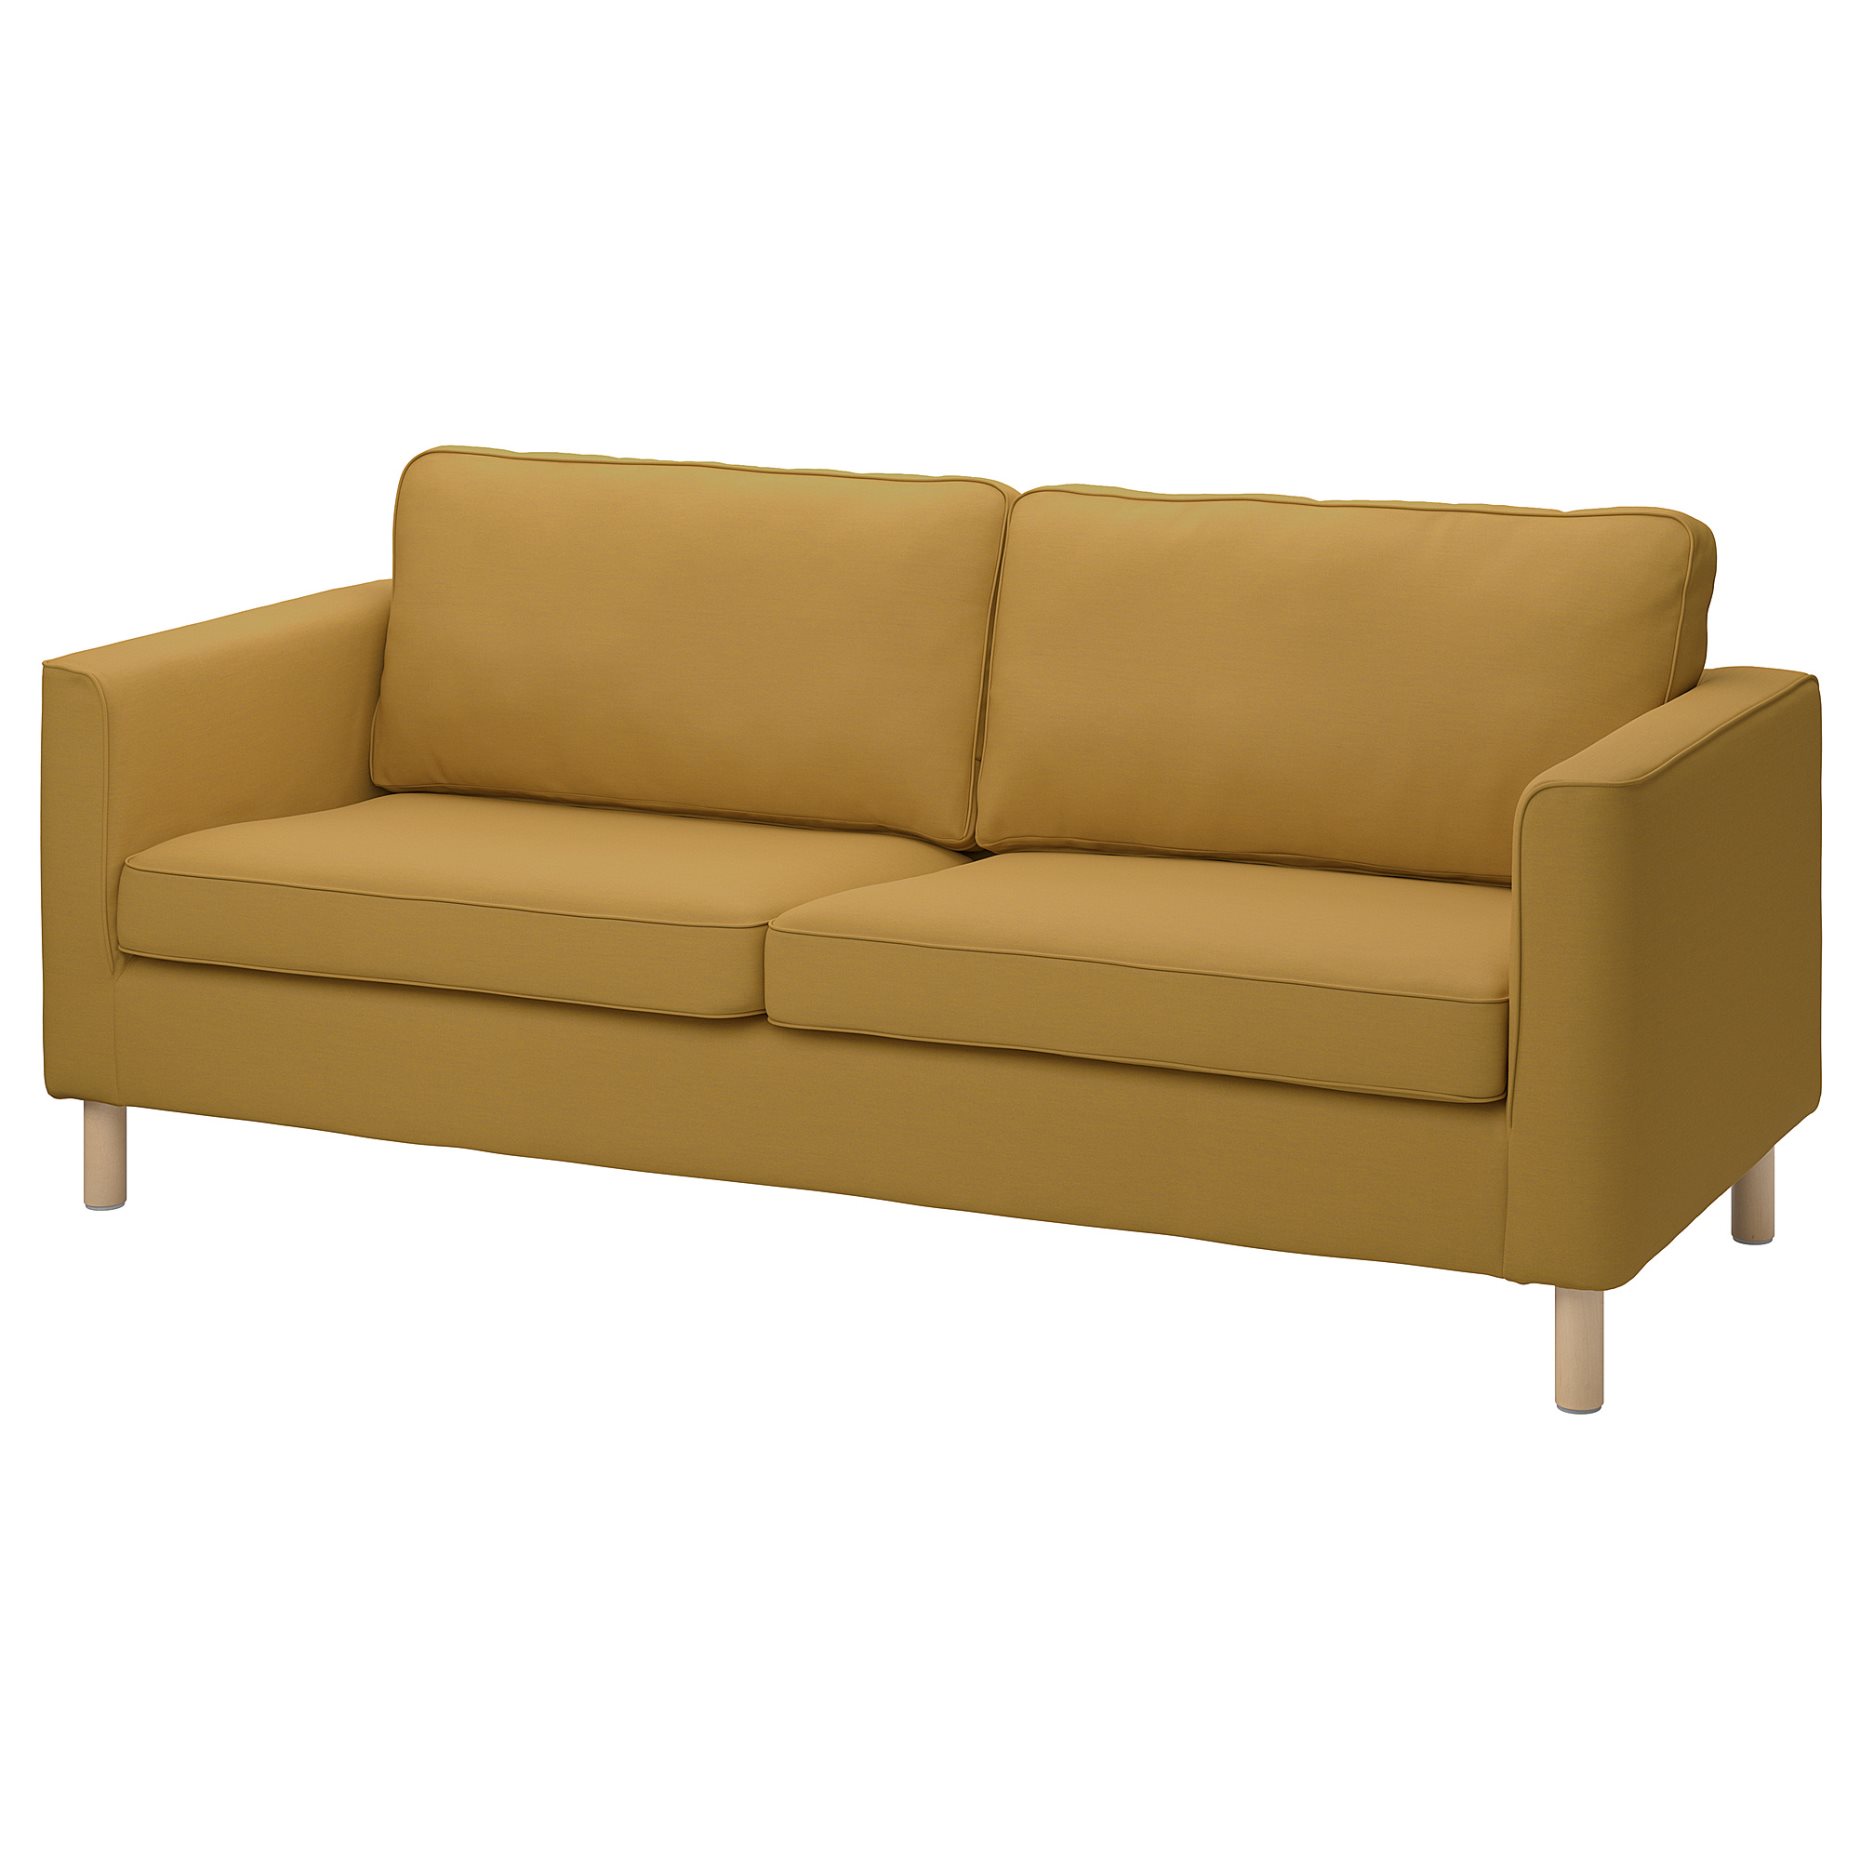 PÄRUP, cover for 3-seat sofa, 205.672.47